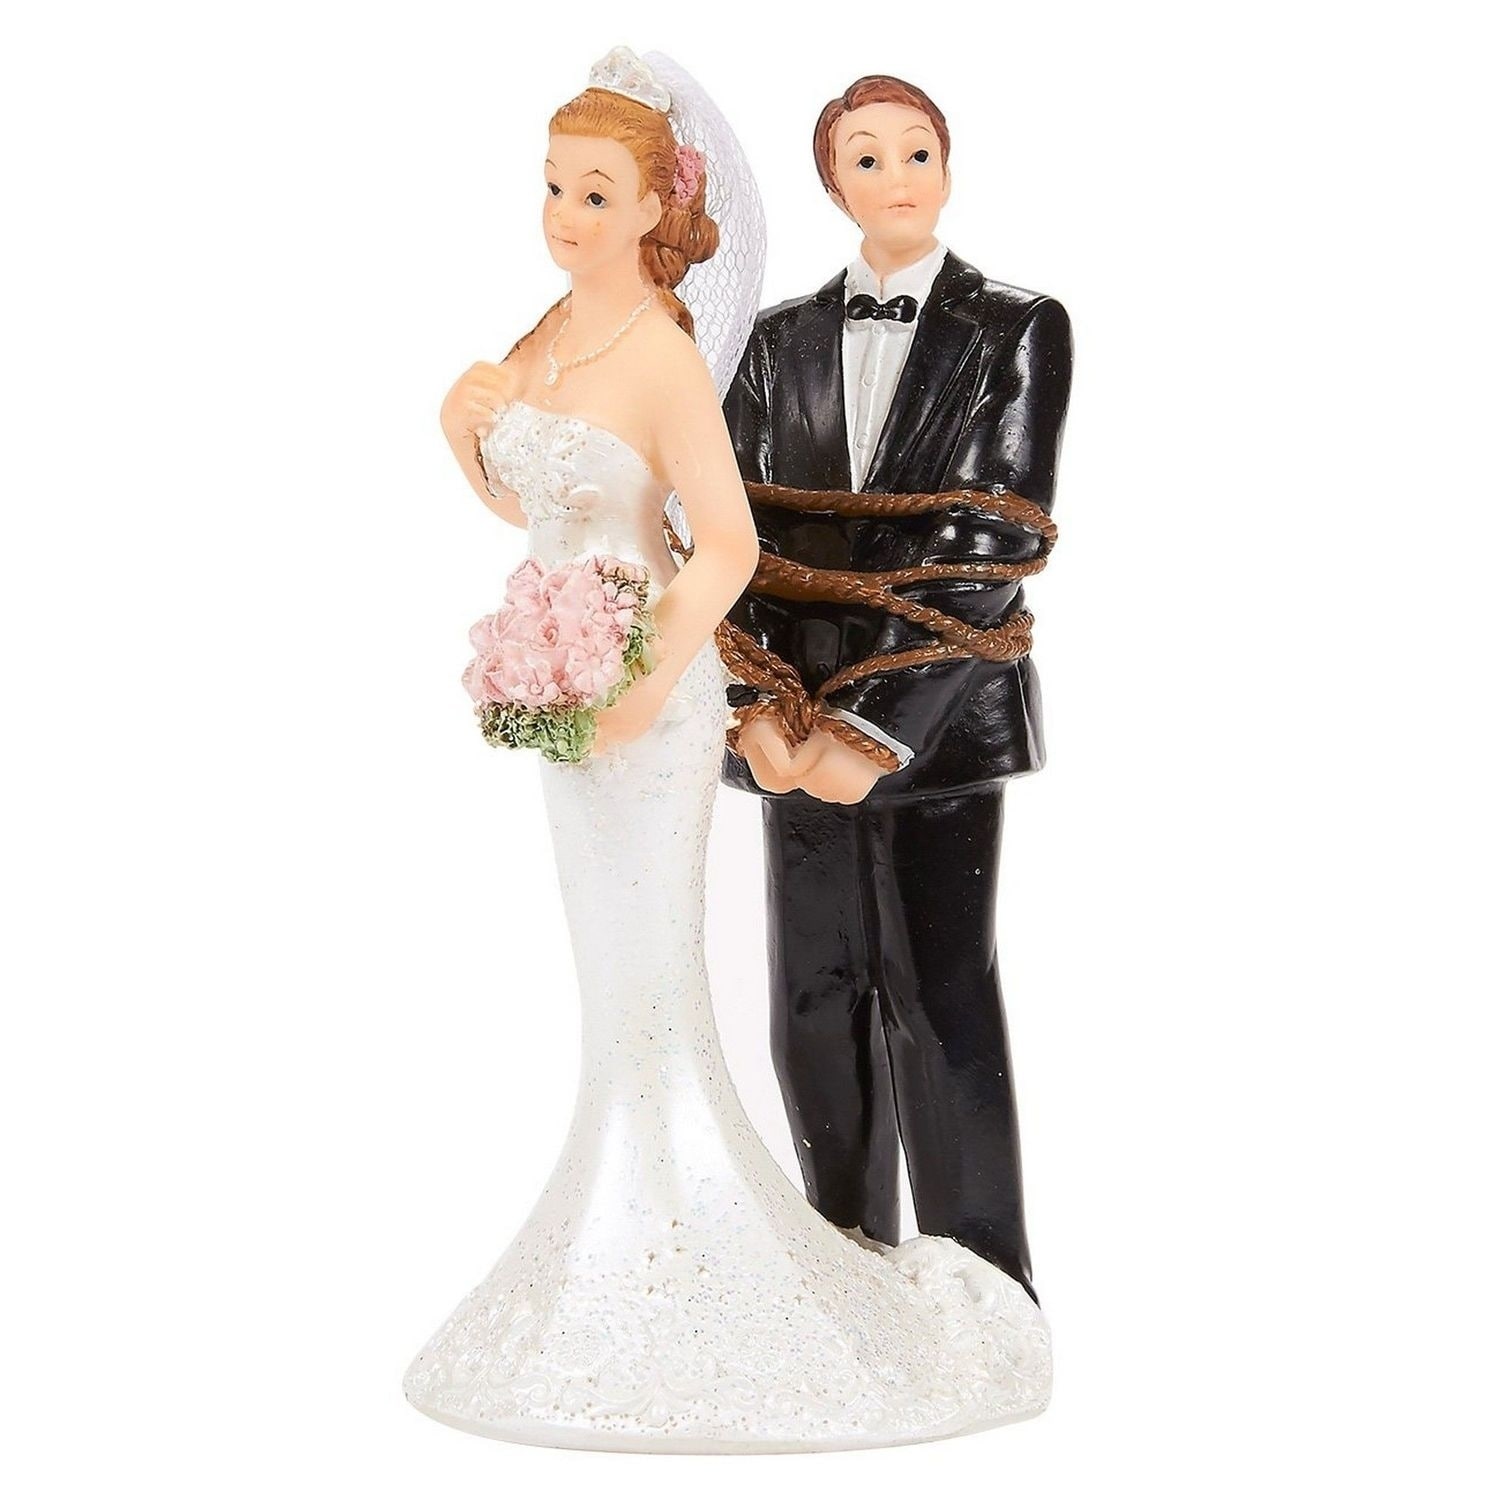 Wedding Cake Topper - Bride Tied up Groom Funny Figures, 2.6 x 4.6 x 2.3" - On Sale - Bed Bath & Beyond - 29875326